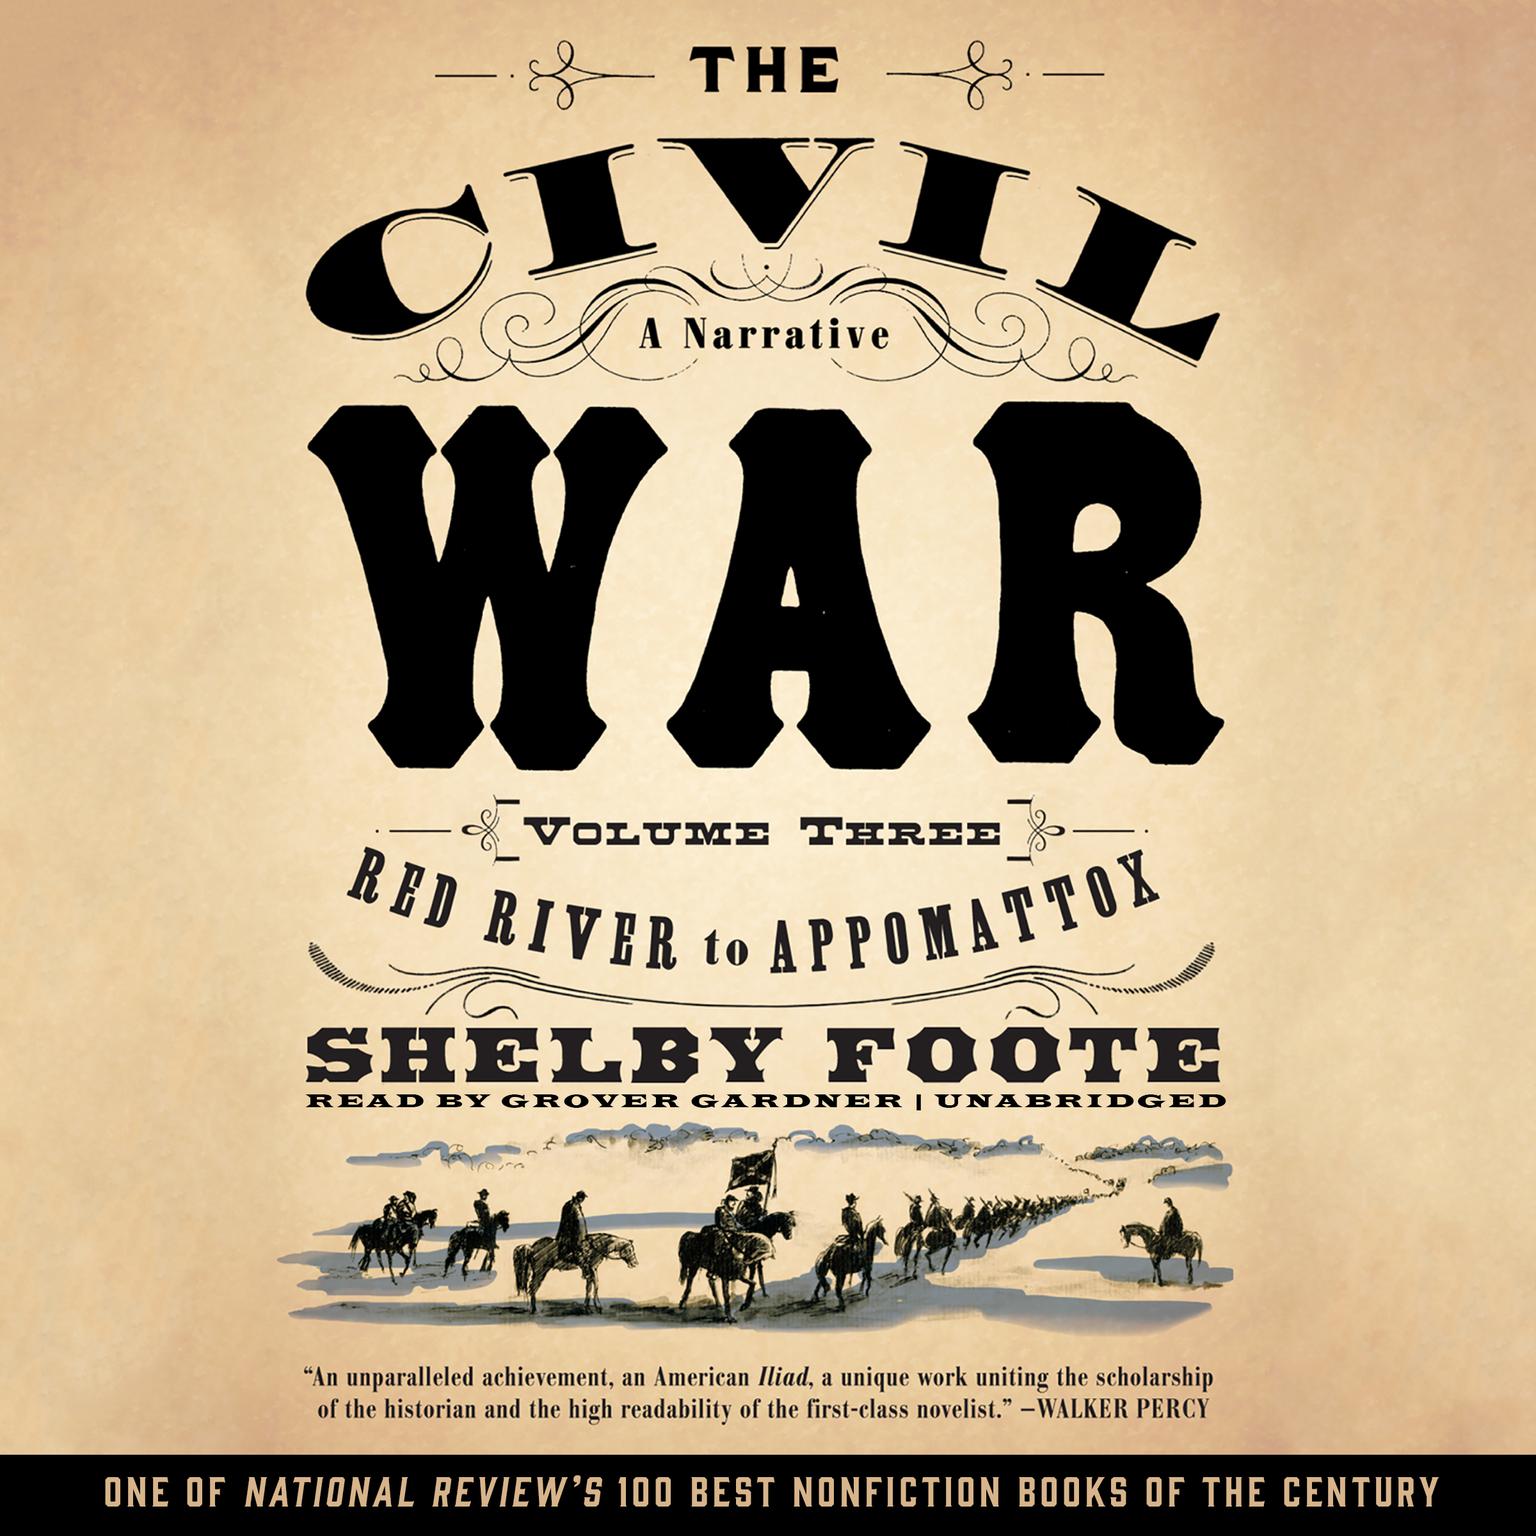 The Civil War: A Narrative, Vol. 3: Red River to Appomattox Audiobook, by Shelby Foote